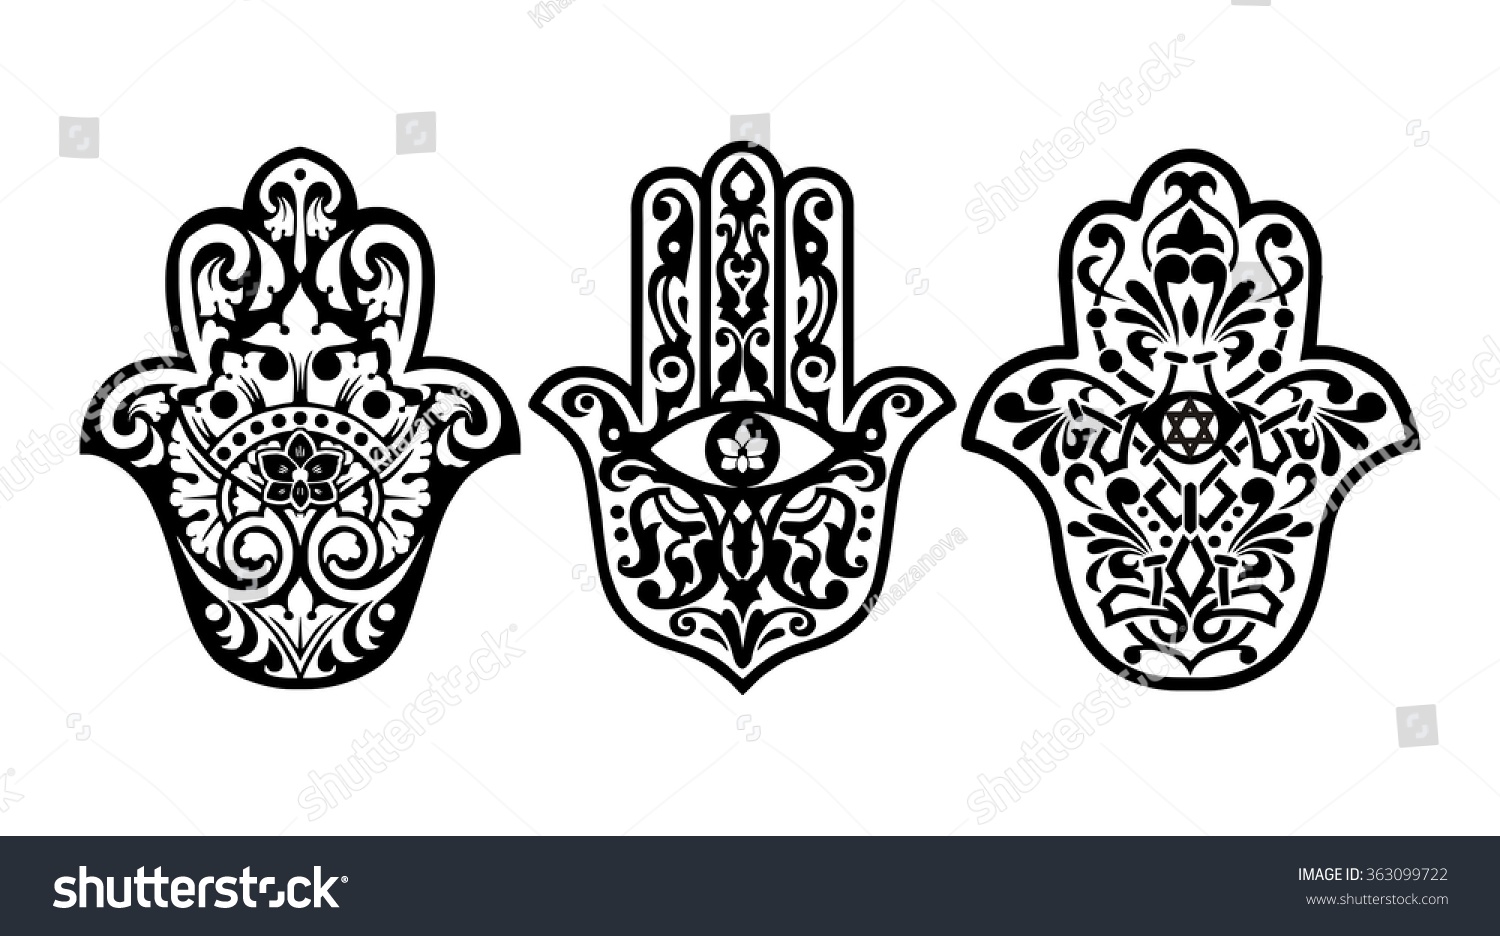 Hamsa Hand, Hand Of Fatima - Amulet, Symbol Of Protection From Devil ...